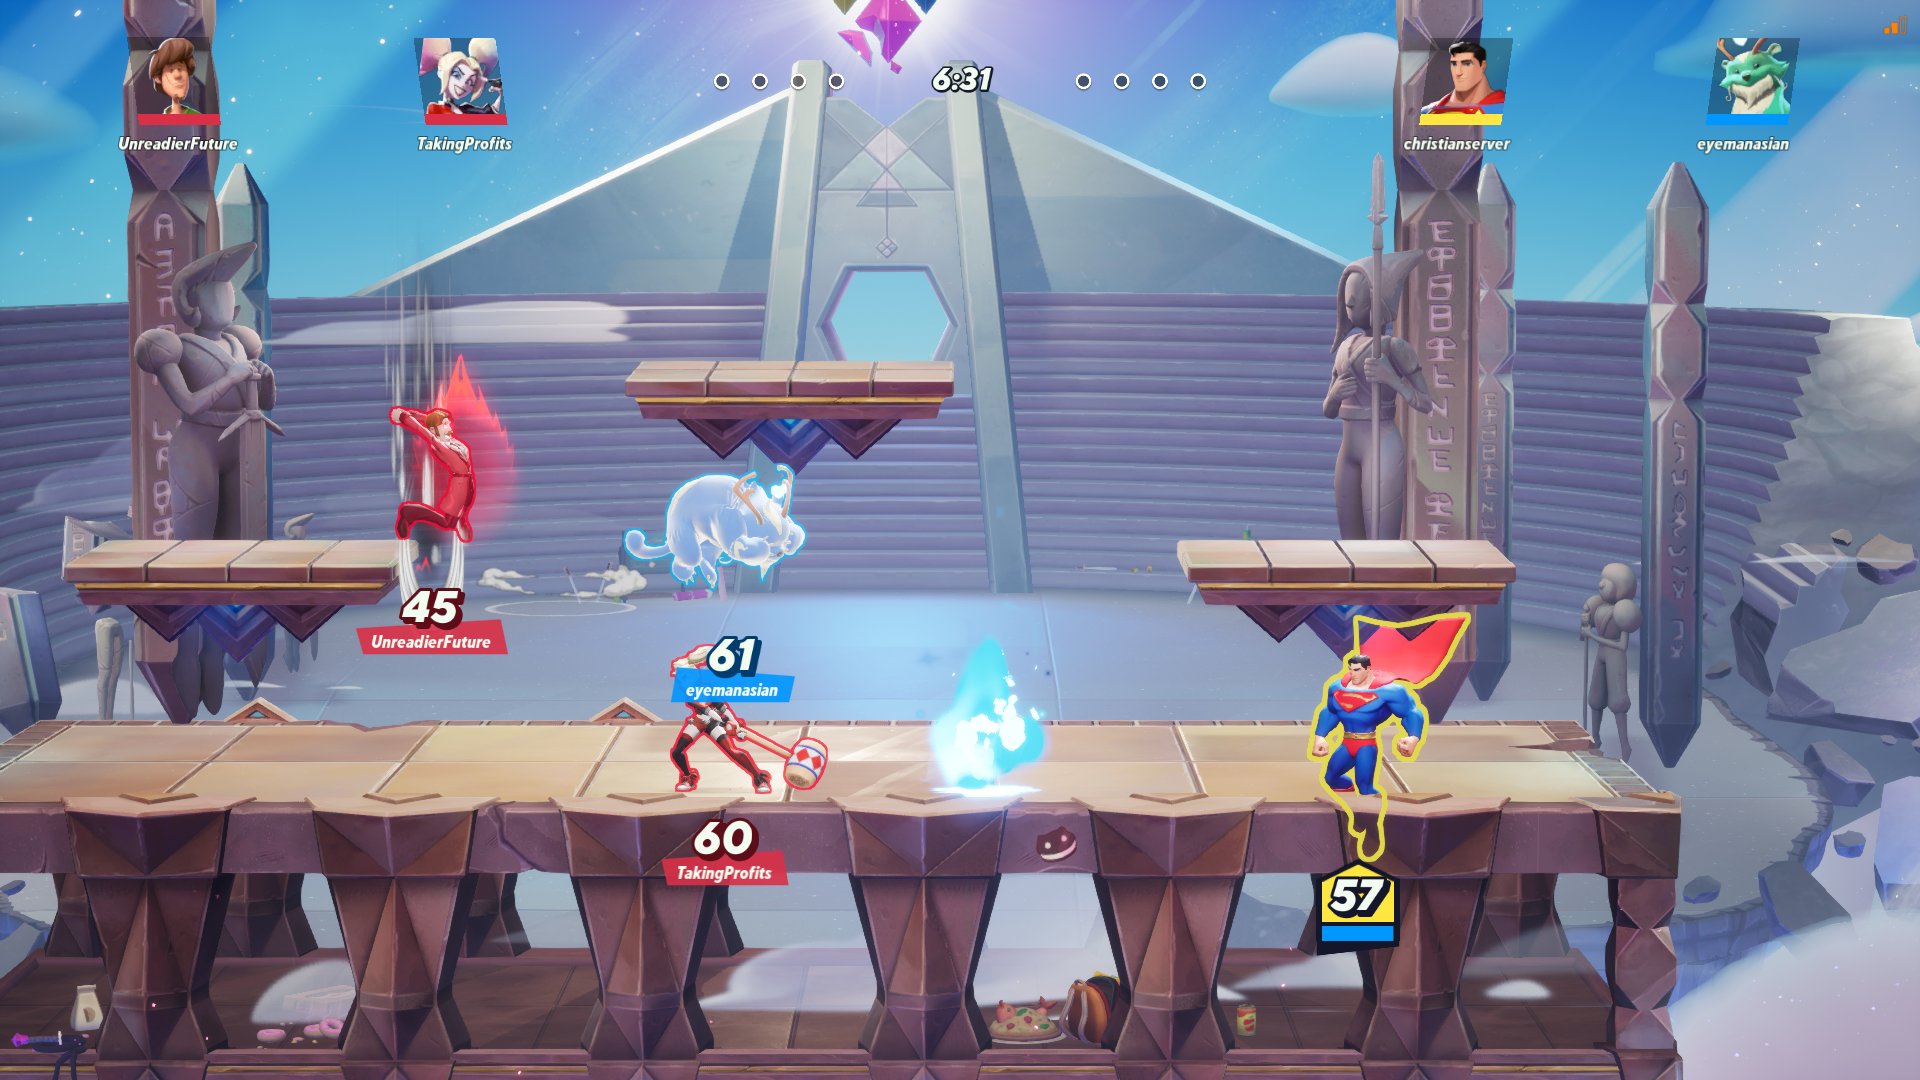 An screenshot from a MultiVersus match showing Superman stuck in the main stage